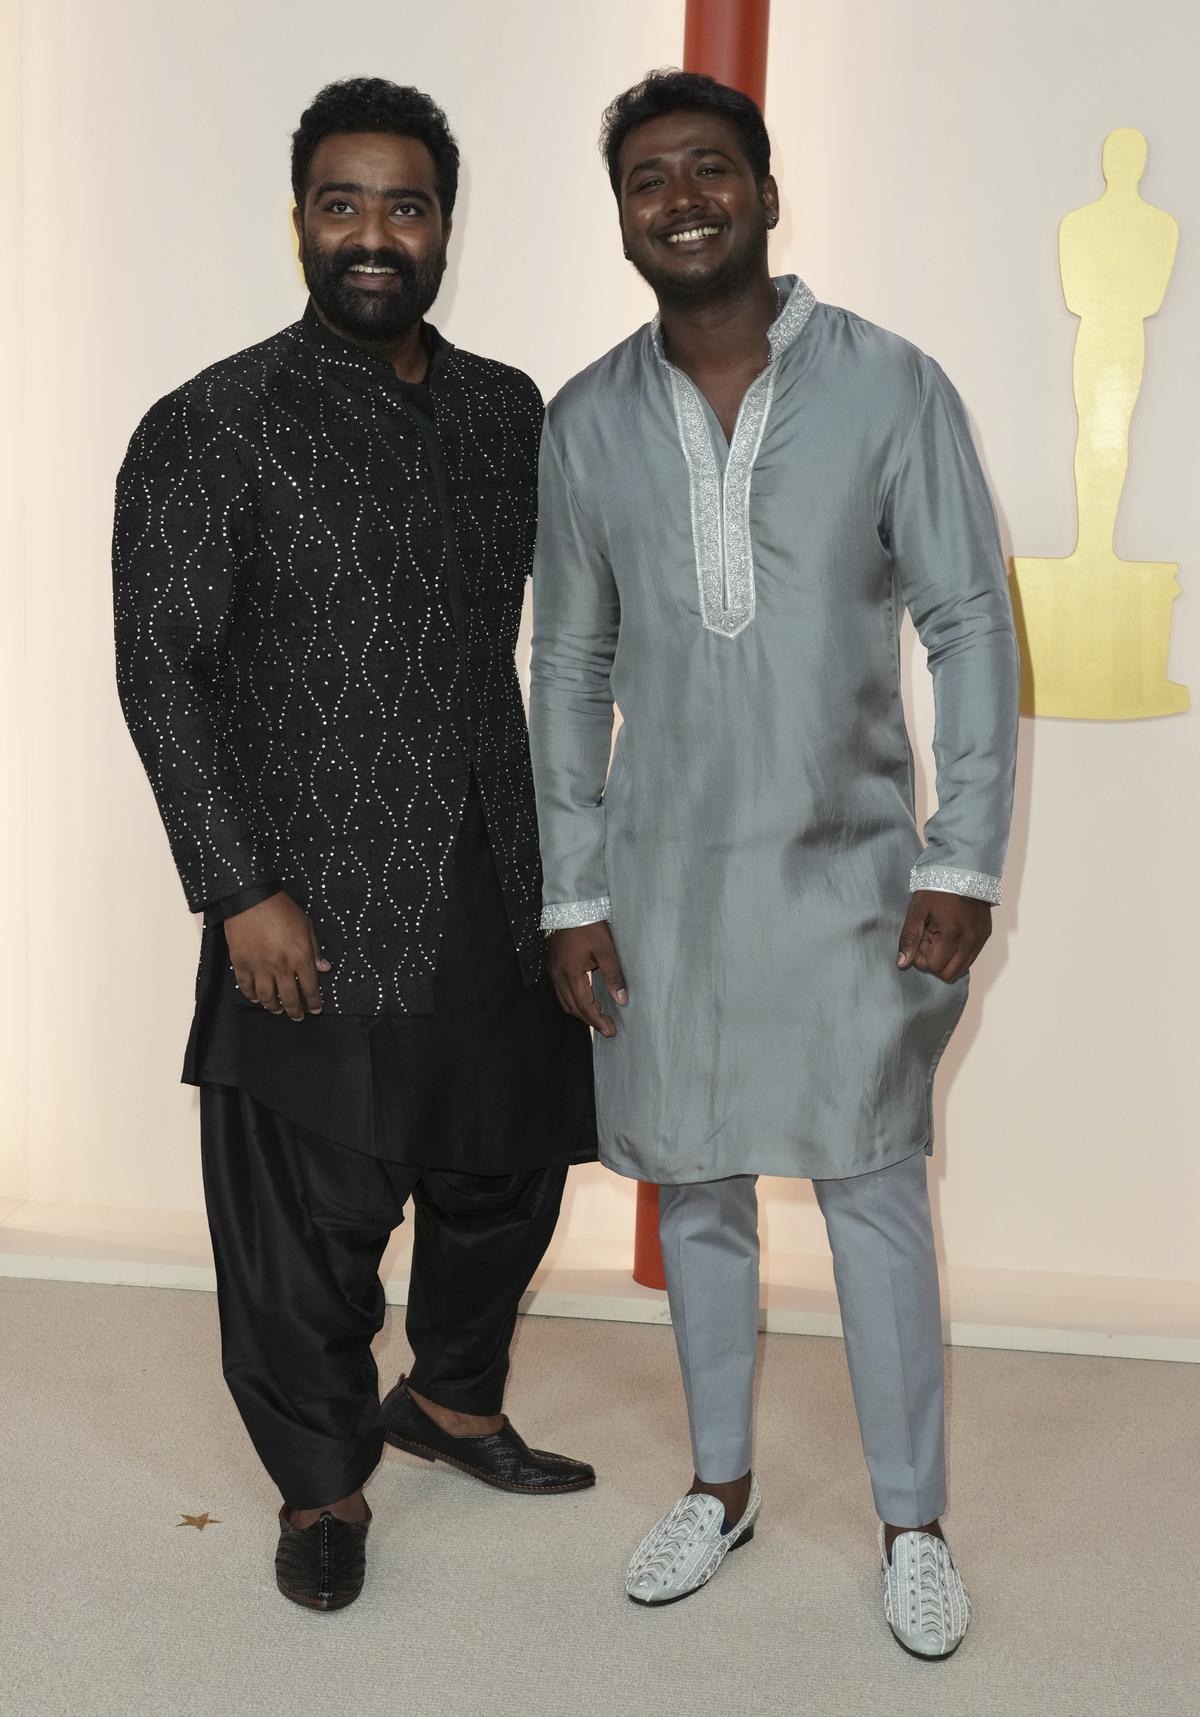 Kaala Bhairava, left, and Rahul Sipligunj arrive at the Oscars on Sunday, March 12, 2023, at the Dolby Theatre in Los Angeles